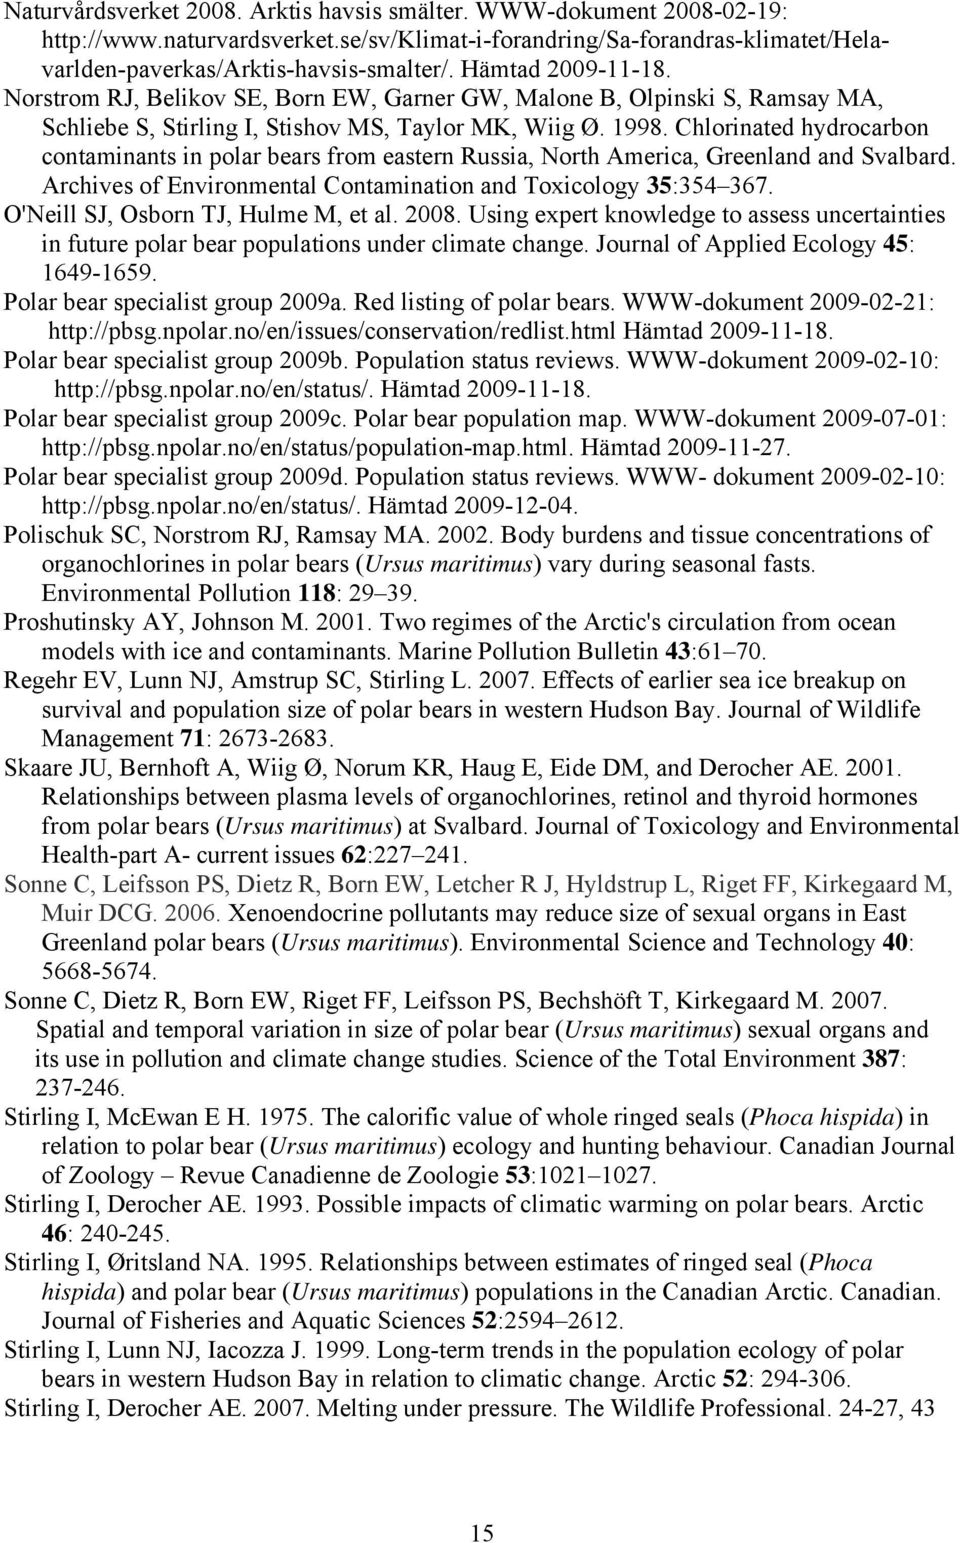 Chlorinated hydrocarbon contaminants in polar bears from eastern Russia, North America, Greenland and Svalbard. Archives of Environmental Contamination and Toxicology 35:354 367.